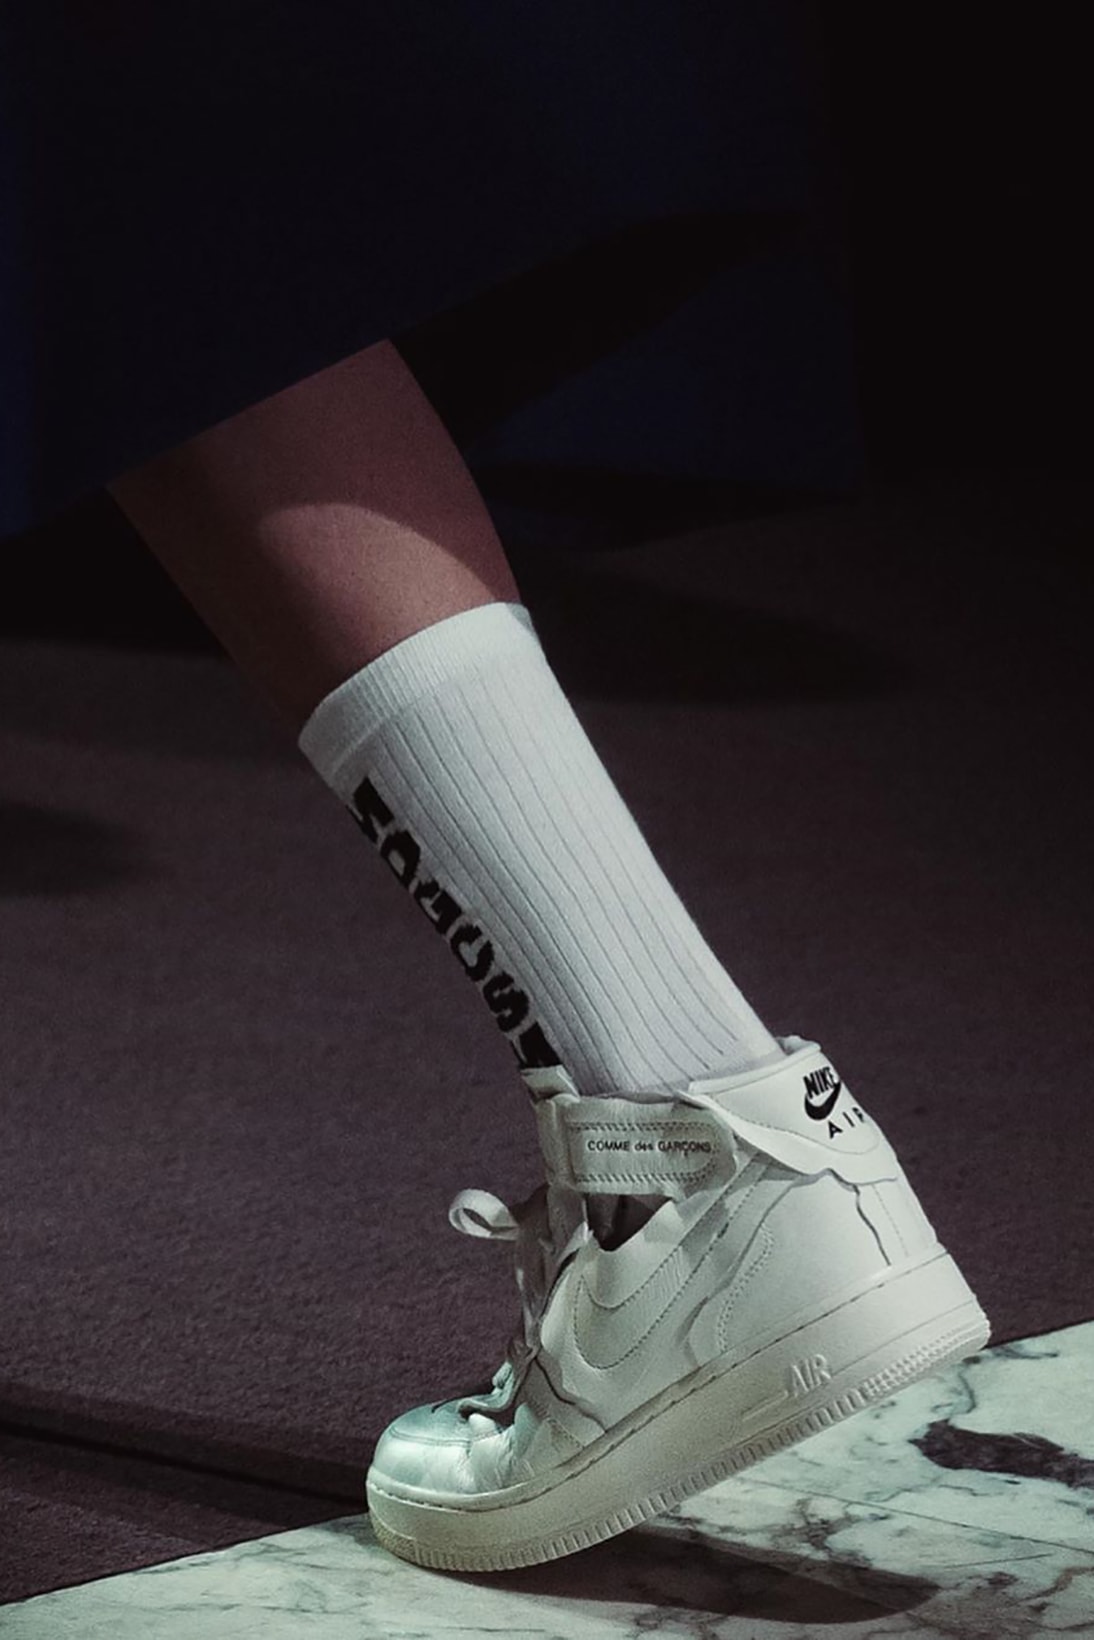 comme des garcons nike collaboration air force 1 mid white sneakers paris fashion week fall winter shoes sneakerhead footwear